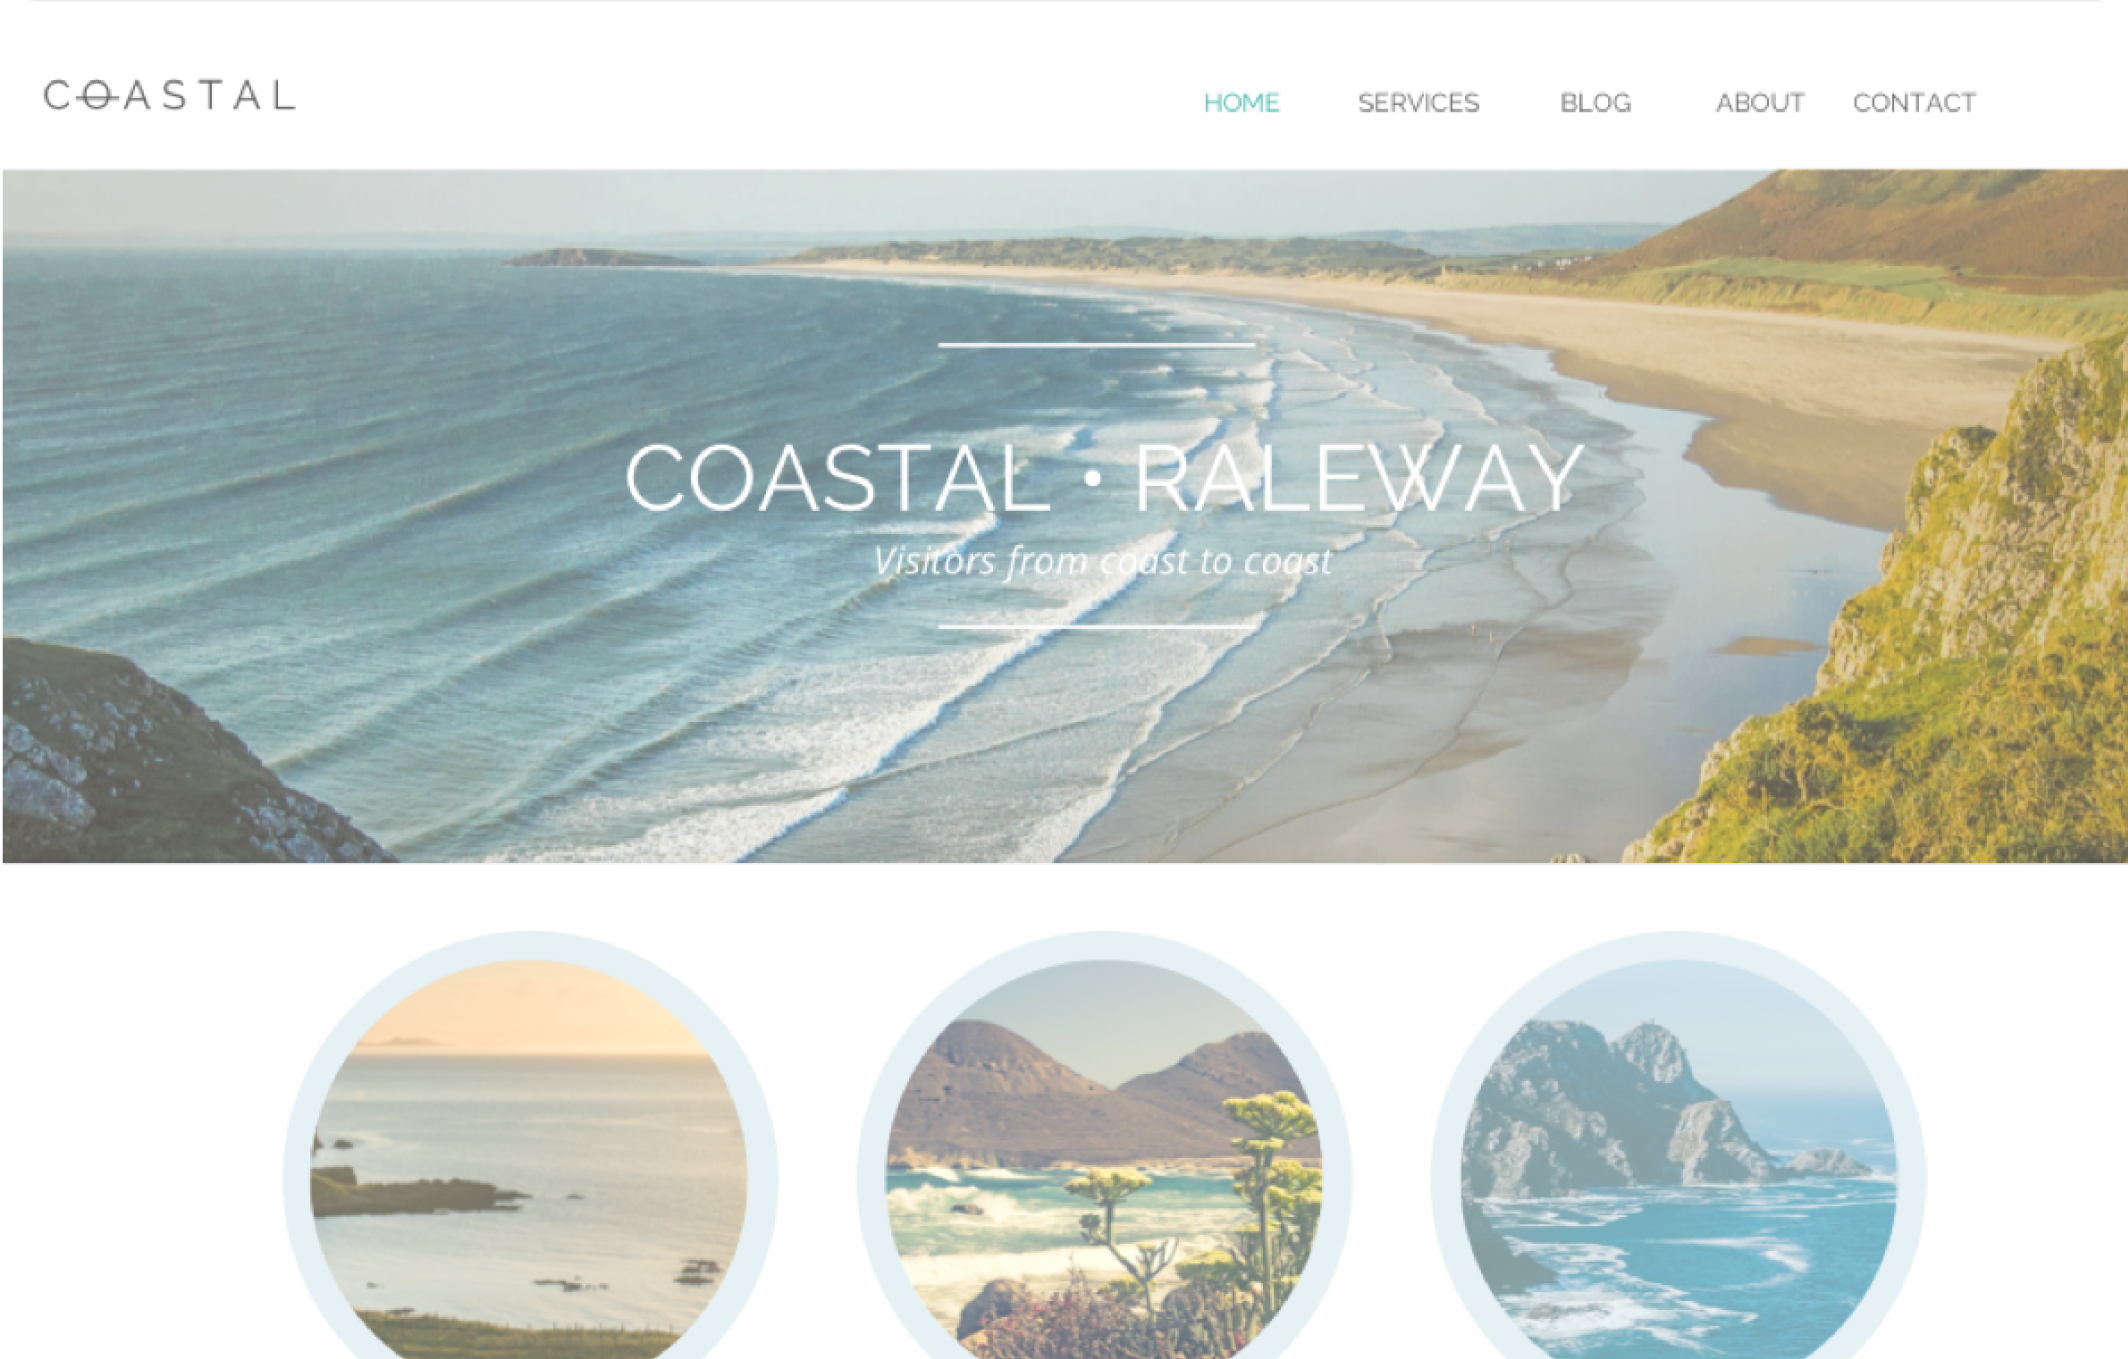 website template with a large image of a beach with multiple circular images of different coastlines